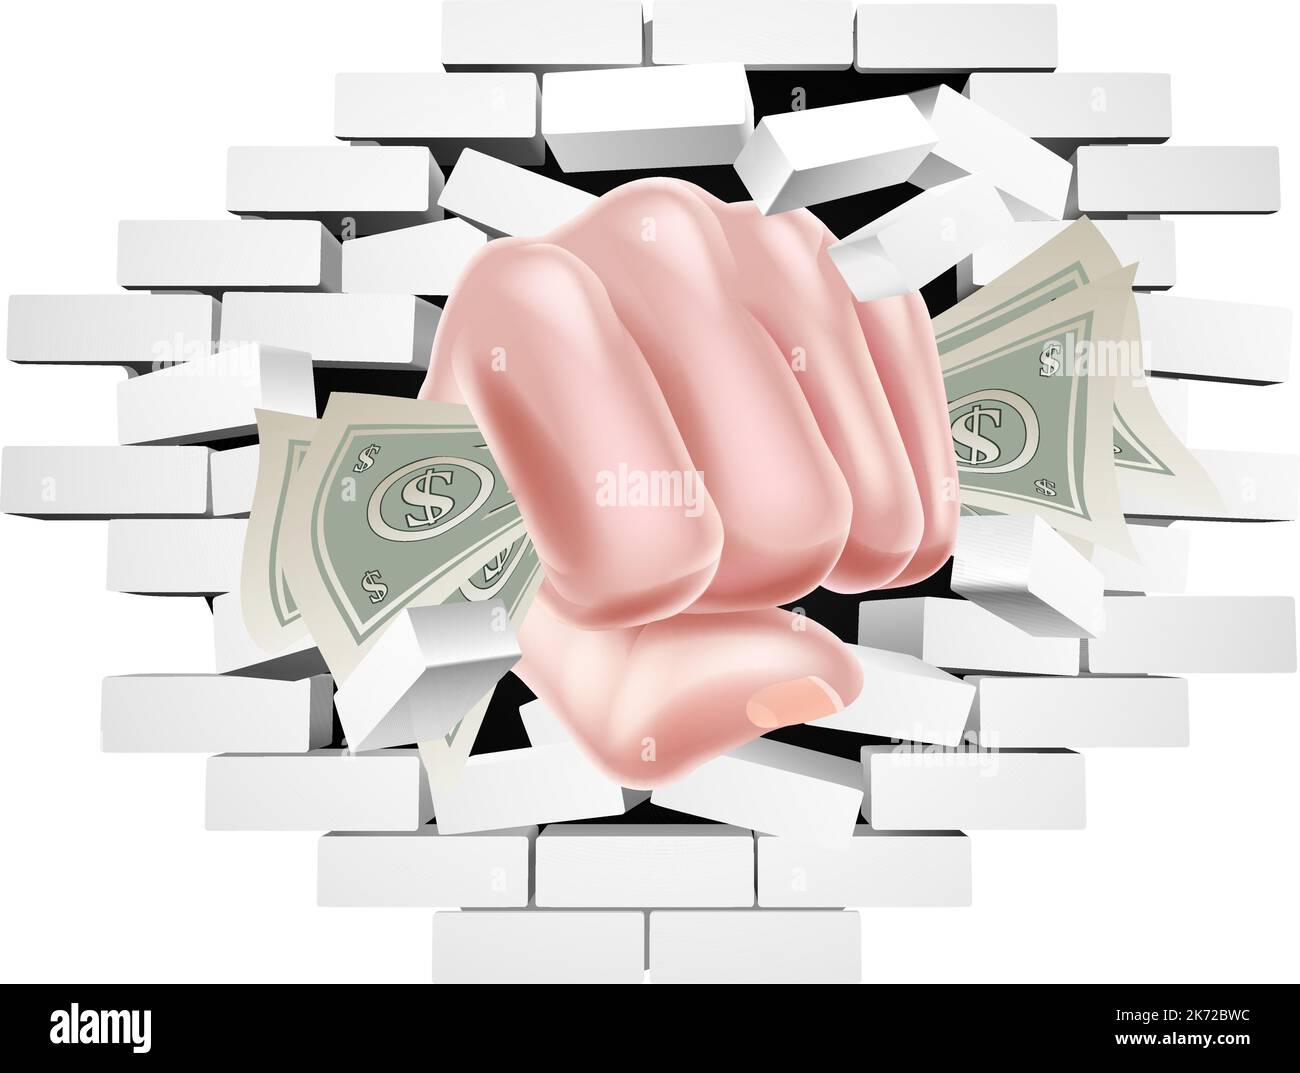 Money Fist Hand Holding Cash Punching Through Wall Stock Vector